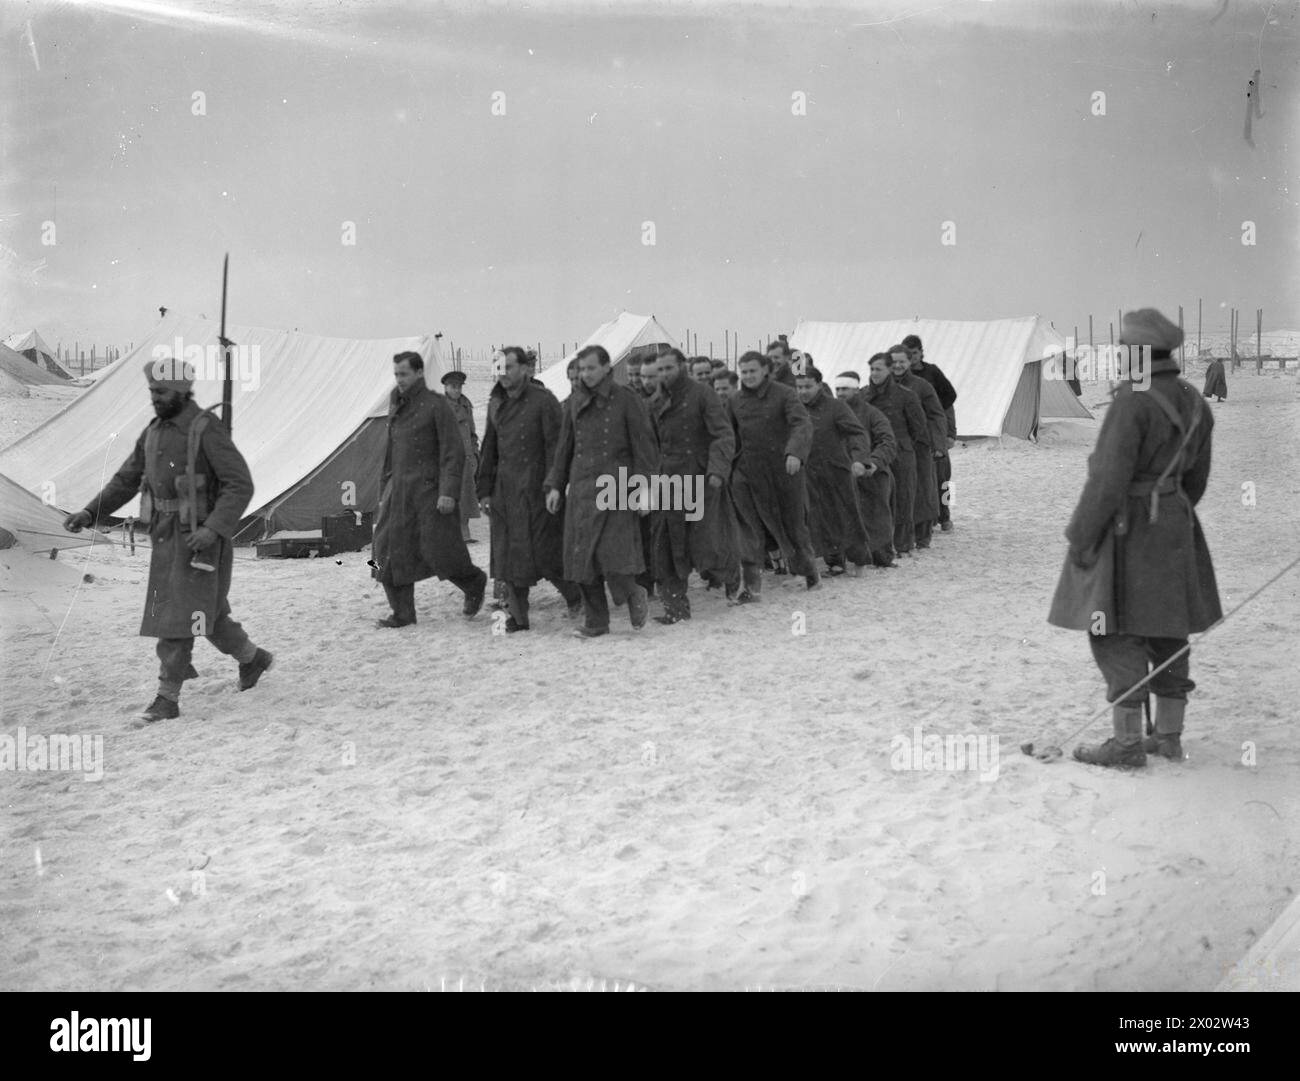 GERMAN U-BOAT PRISONERS. 30 DECEMBER 1941, AGEMI, EGYPT. - Members of a captured U-boat crew arriving at their camp under an Indian guard Stock Photo